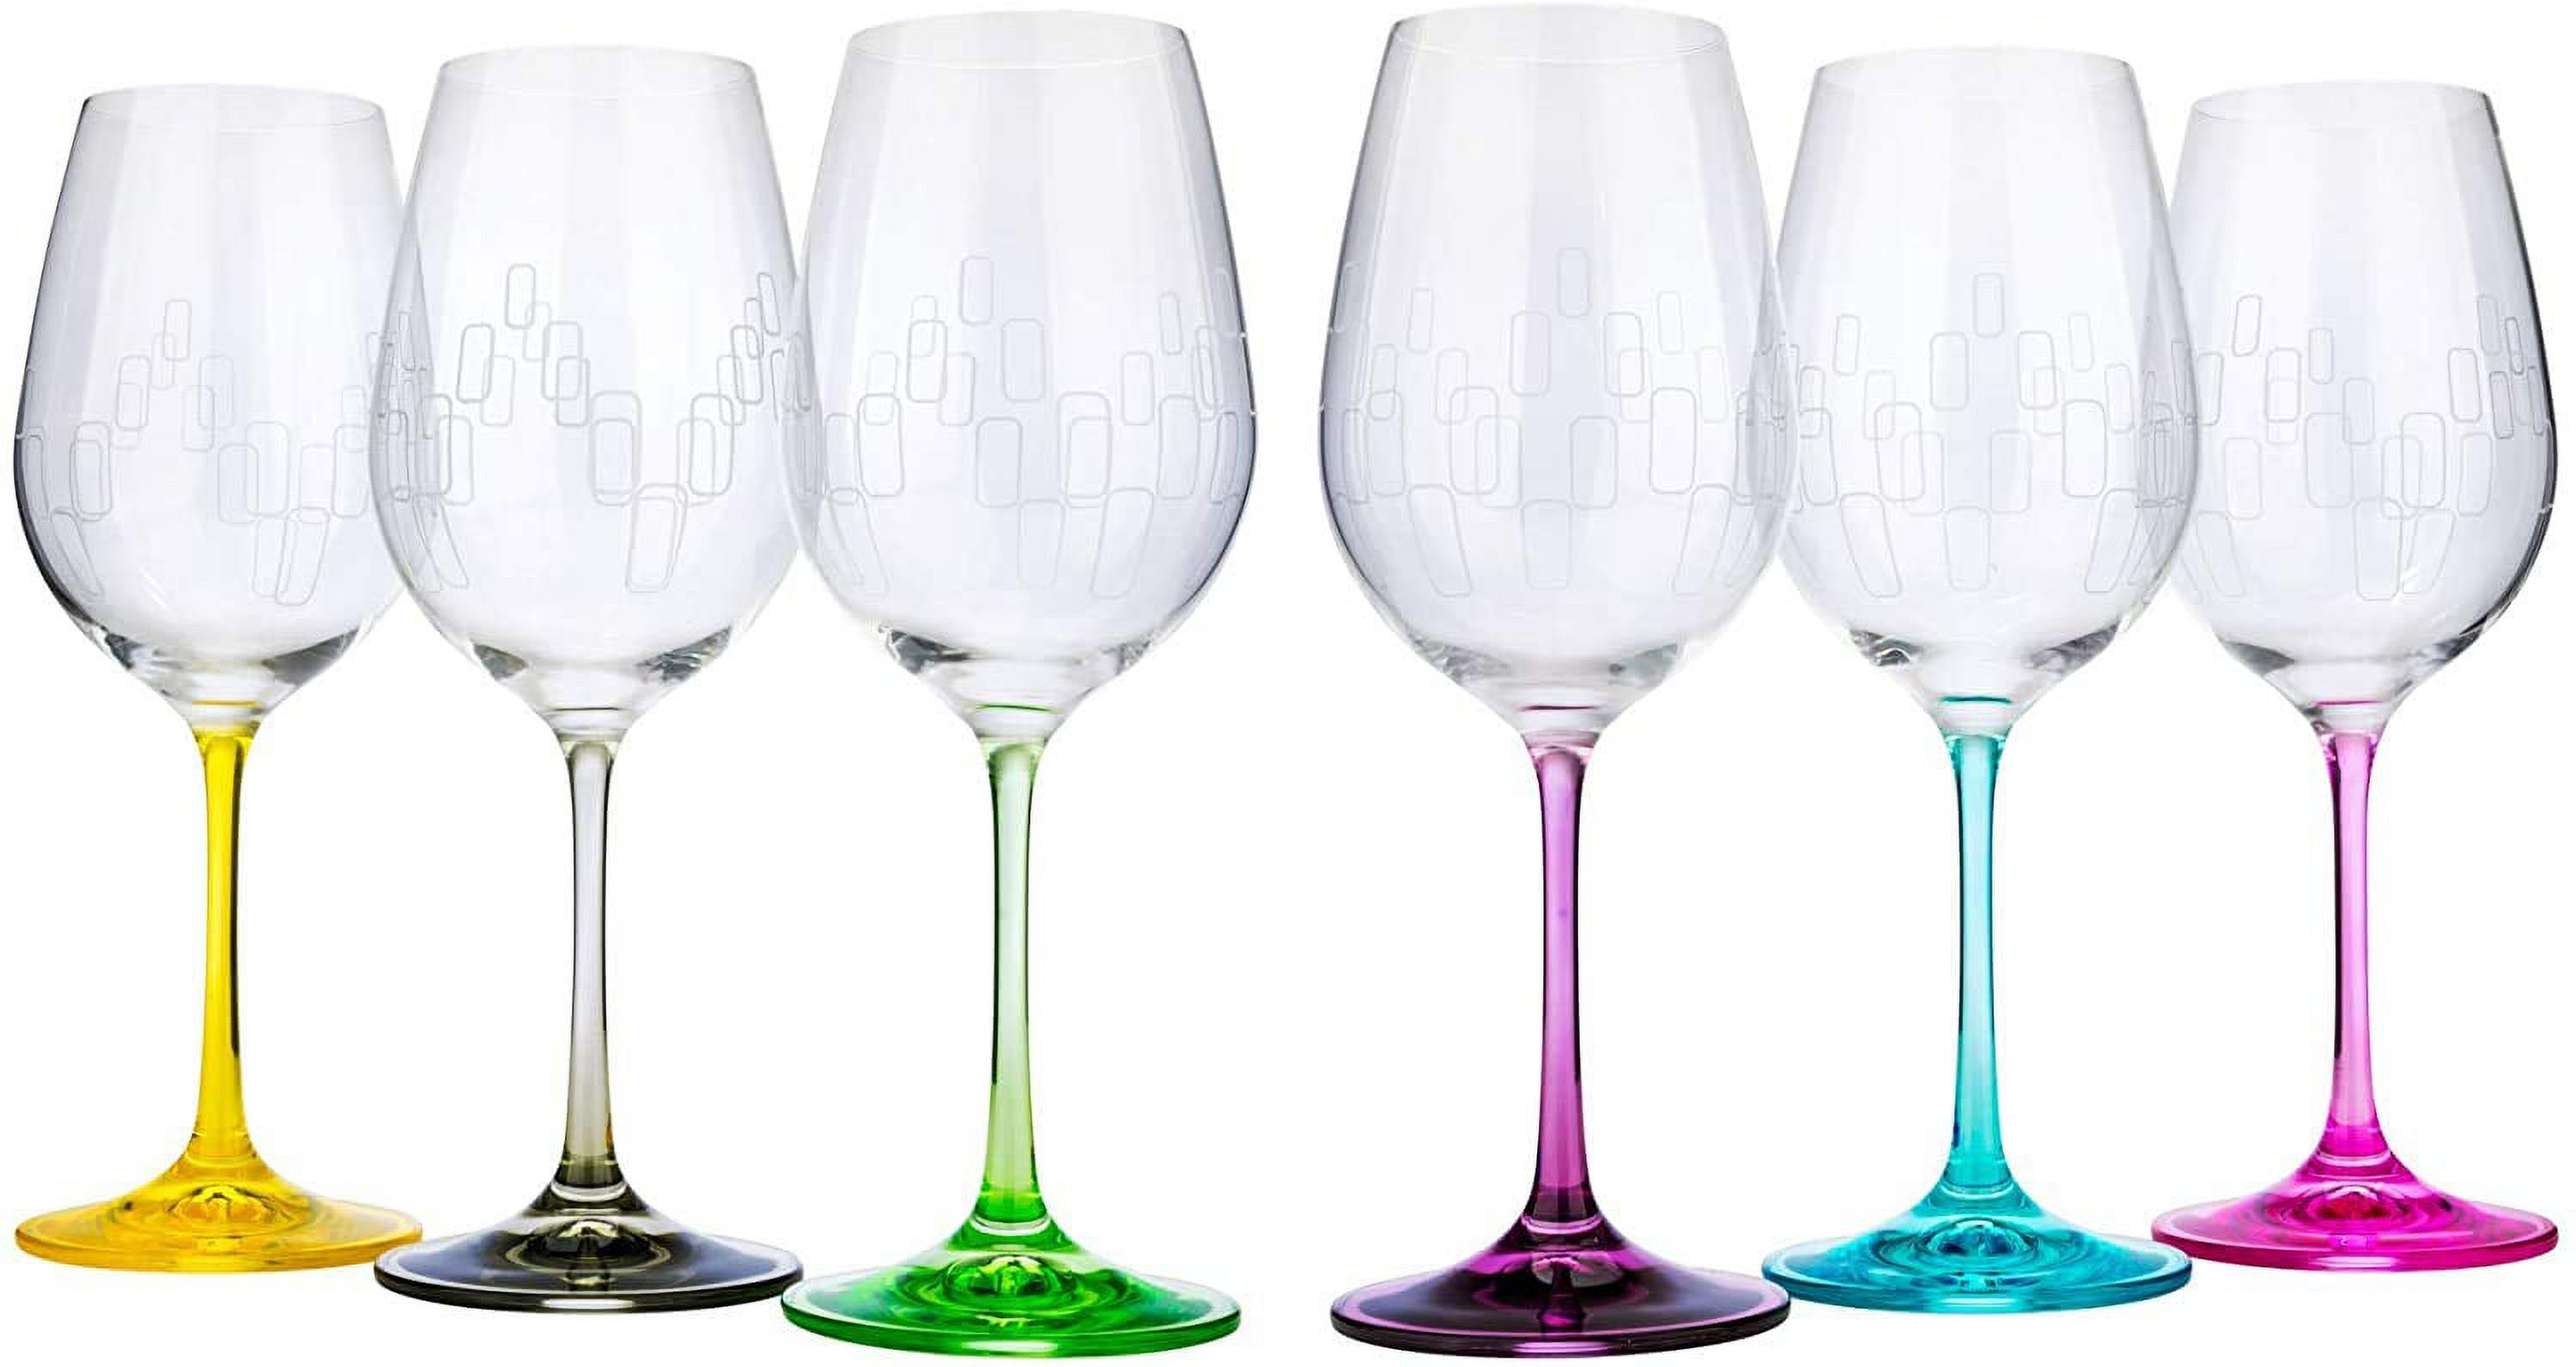 Wine Glasses Multi Colored Engraved Rainbow Set of 6 - Each Base Different Color Drinkware - image 1 of 2